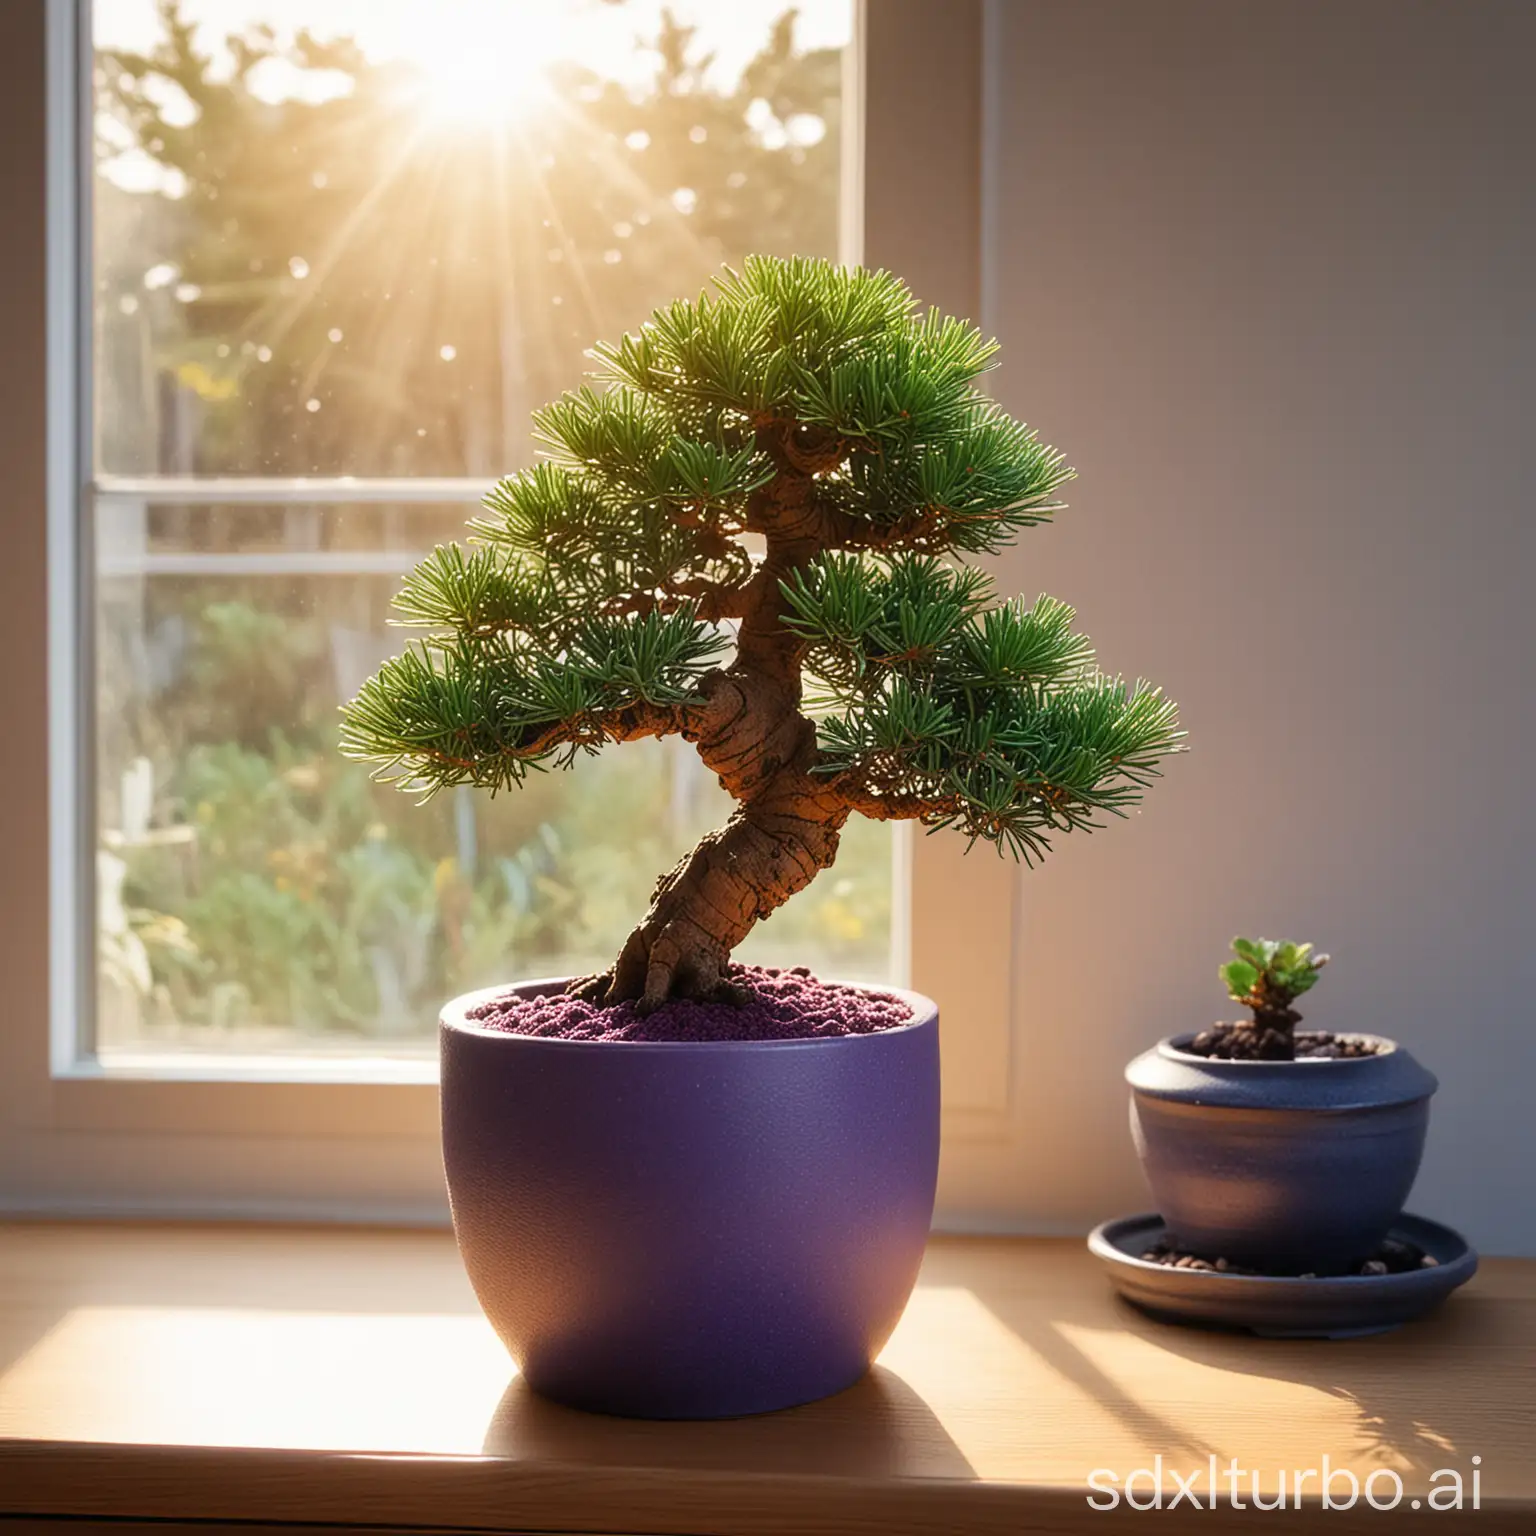 On the desk in the living room, there is a purple sand flowerpot with a pine bonsai, and the sunlight shines through the window onto the flowerpot.